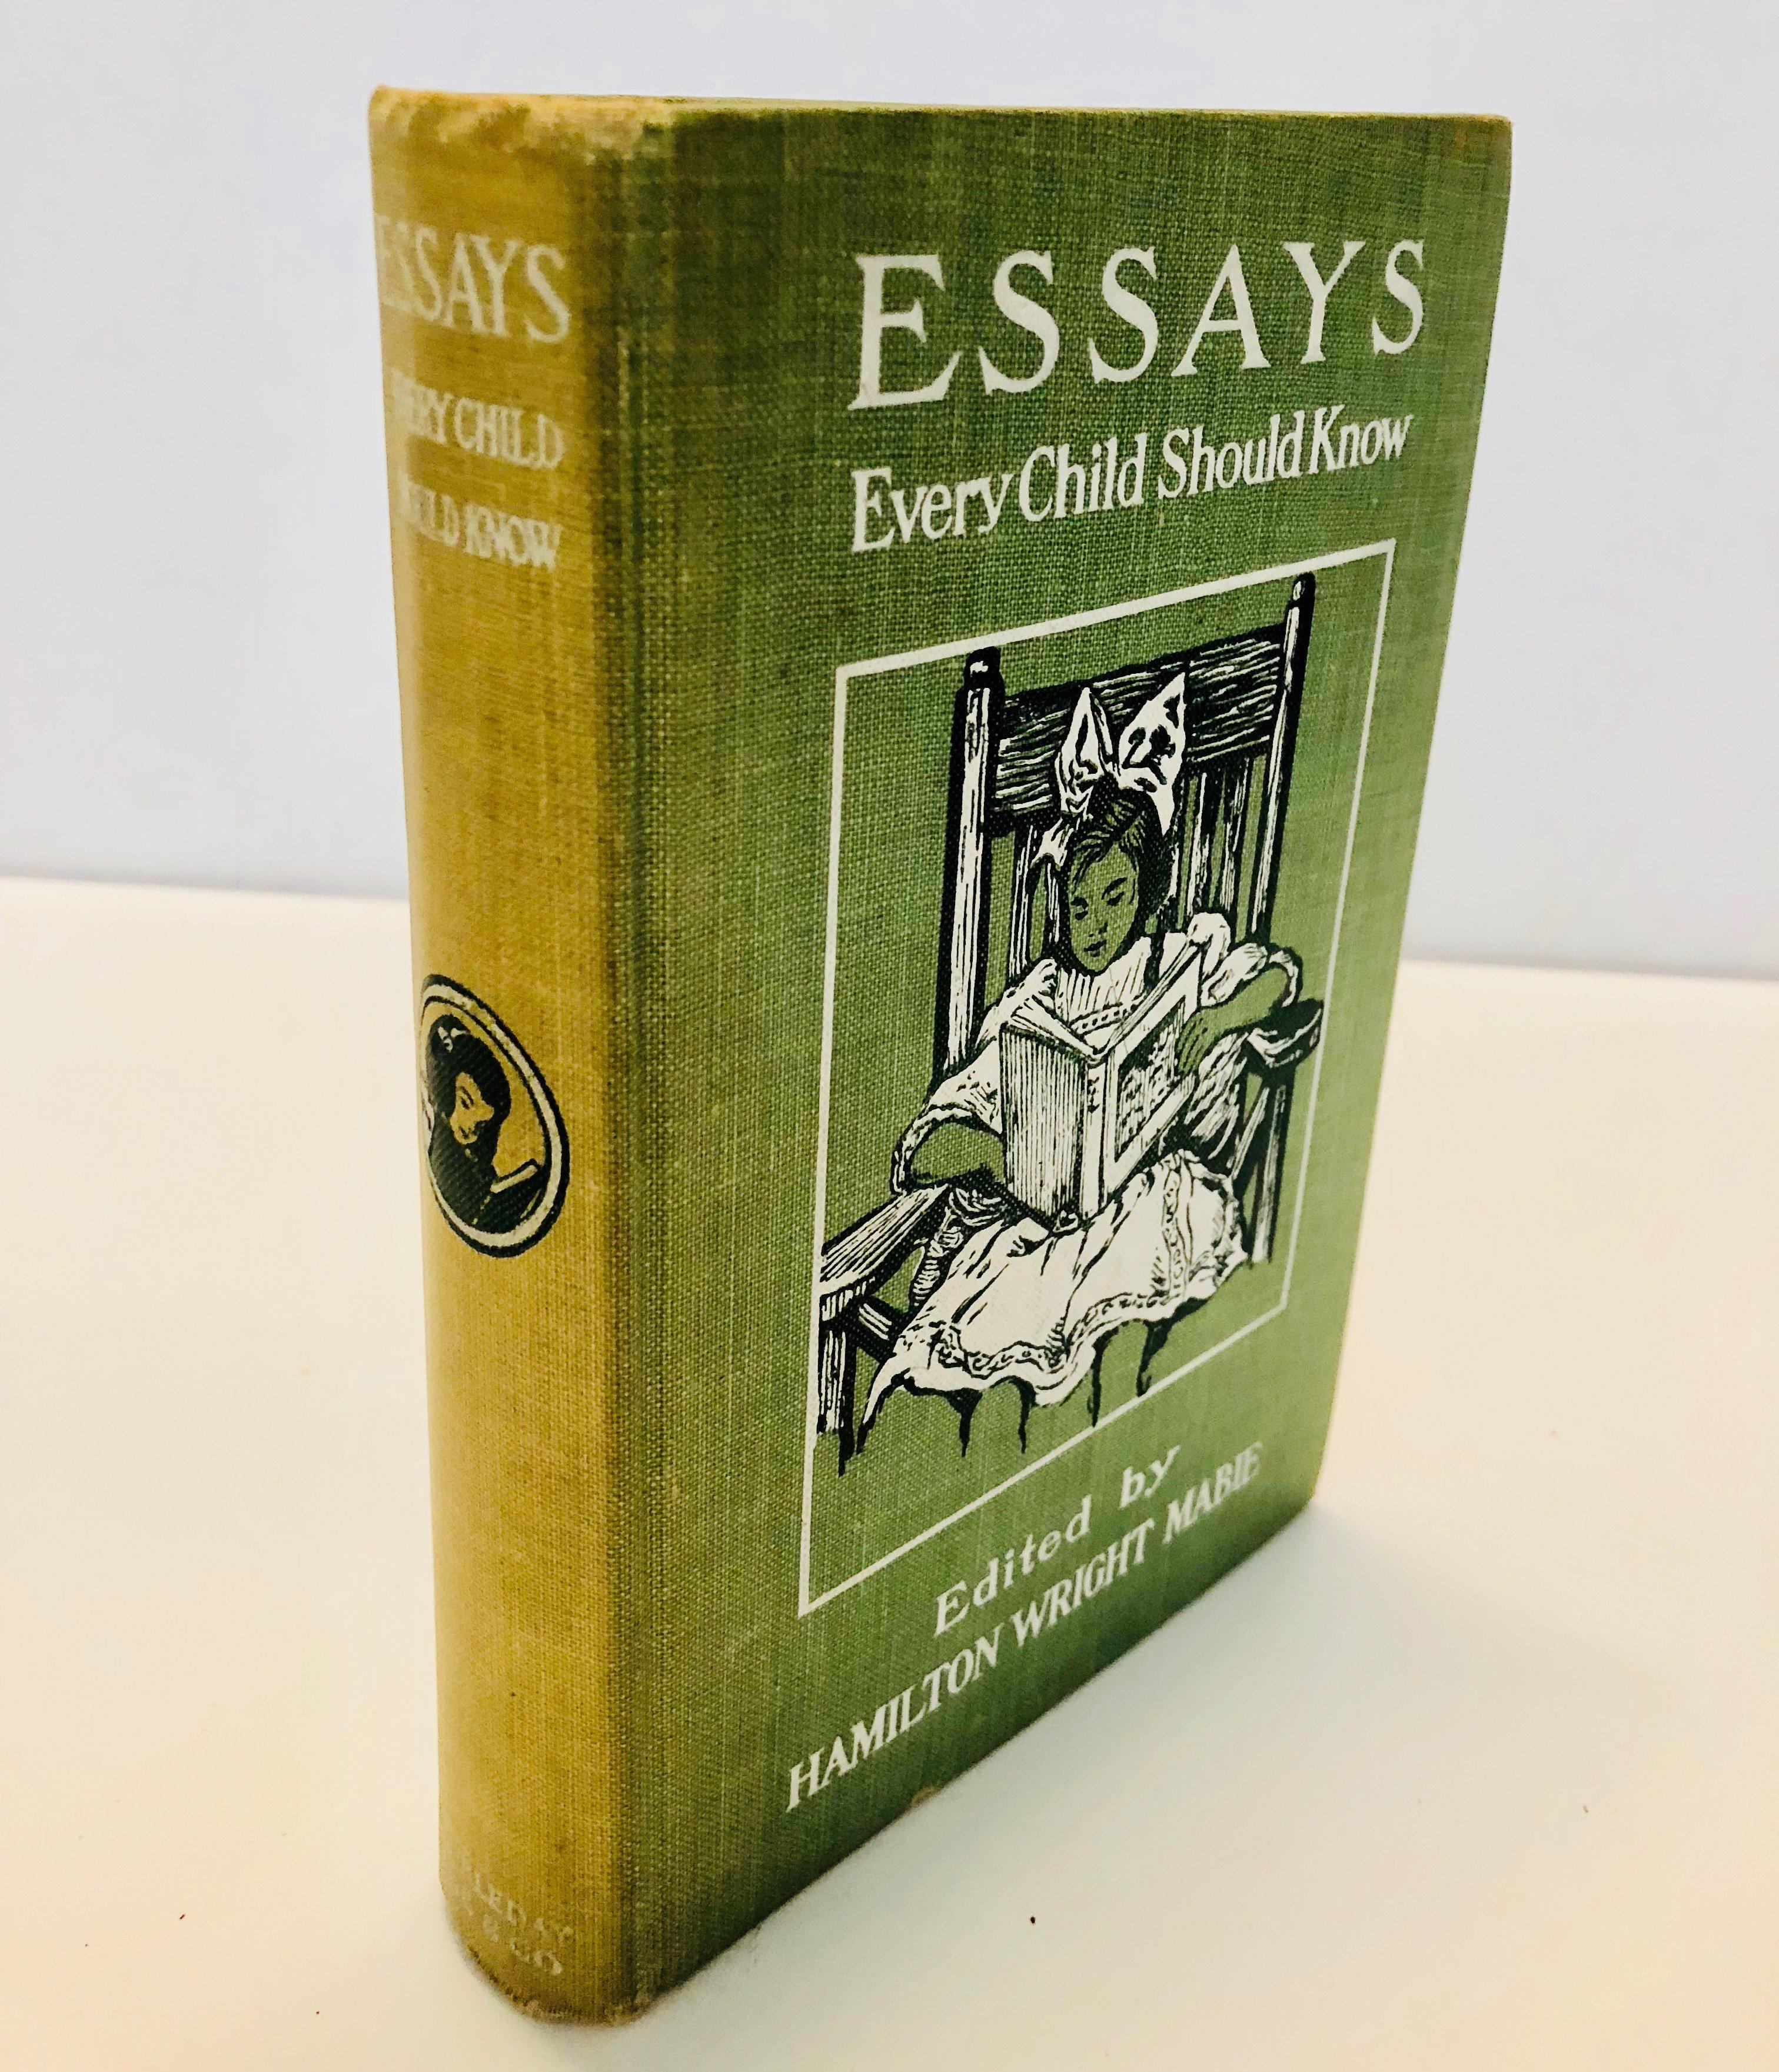 Essays That Every Child Should Know by Hamilton Wright Mabie (1914)